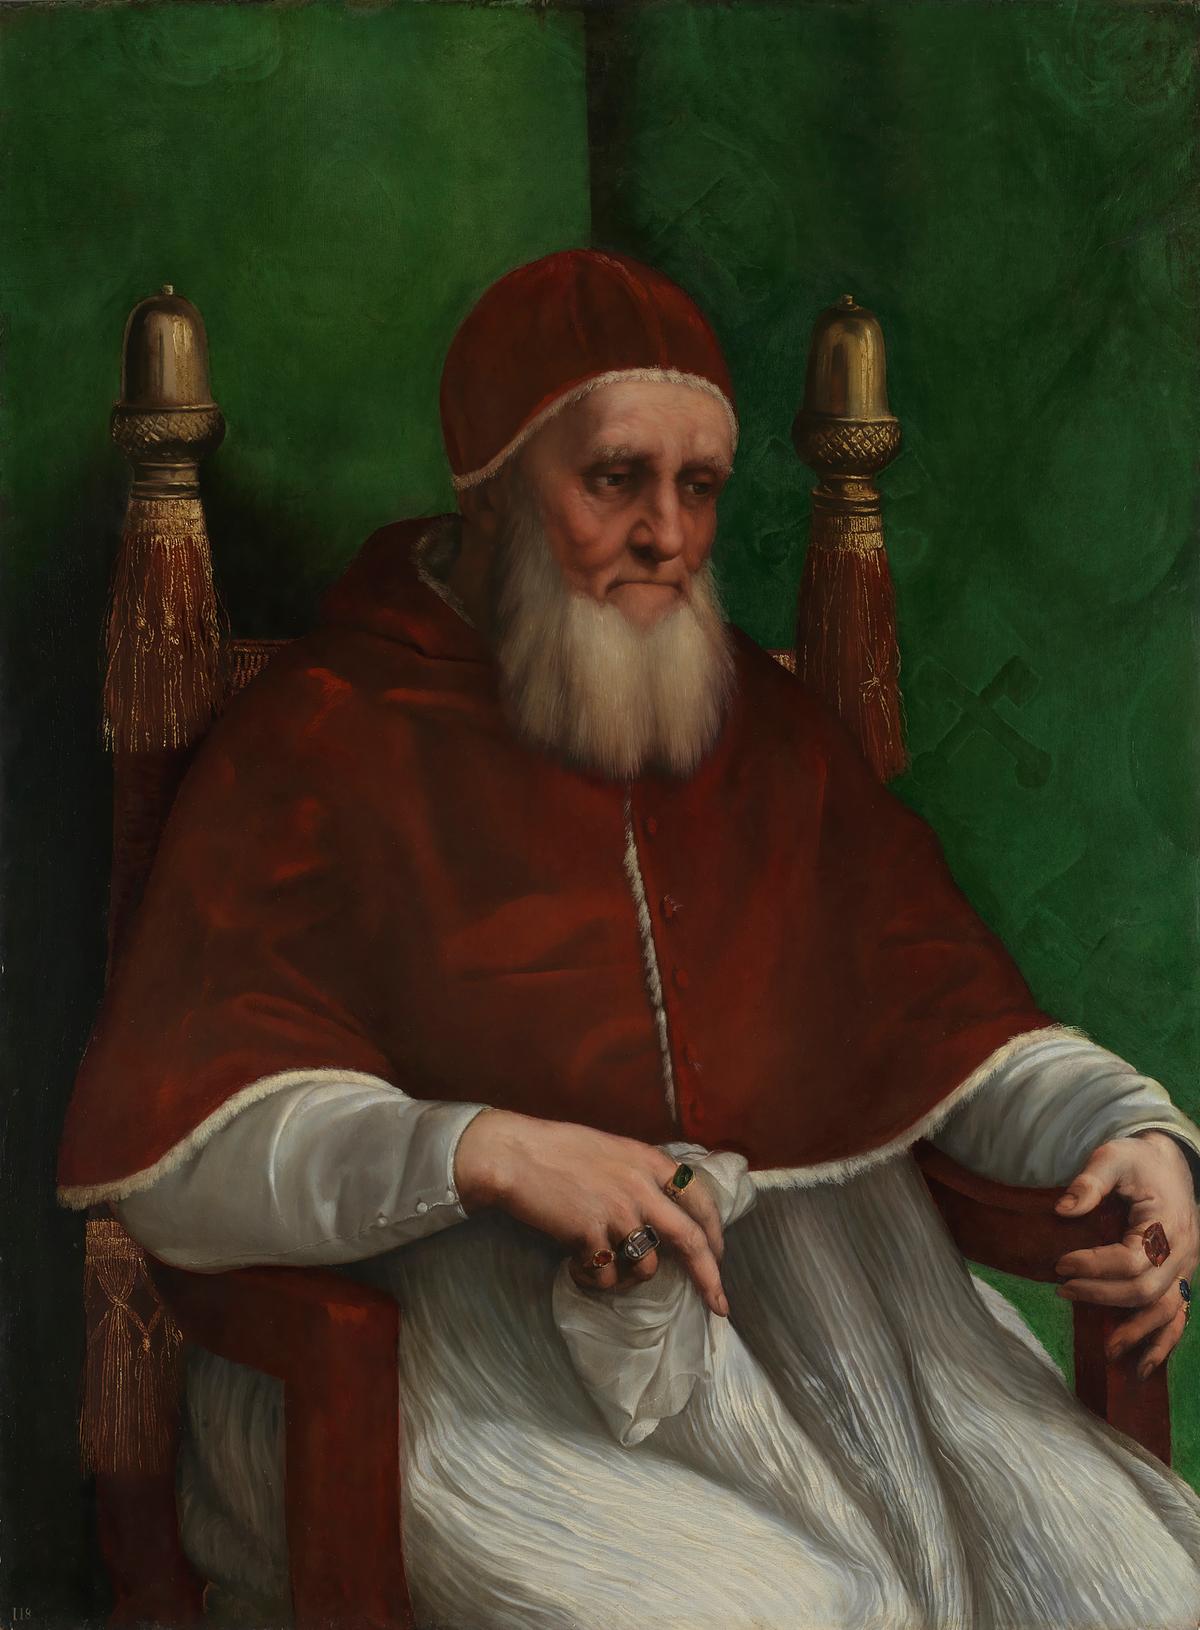 “Portrait of Pope Julius II,” 1511, by Raphael. Oil on poplar; 42 3/4 inches by 31 7/8 inches. The National Gallery, London. (Public Domain)